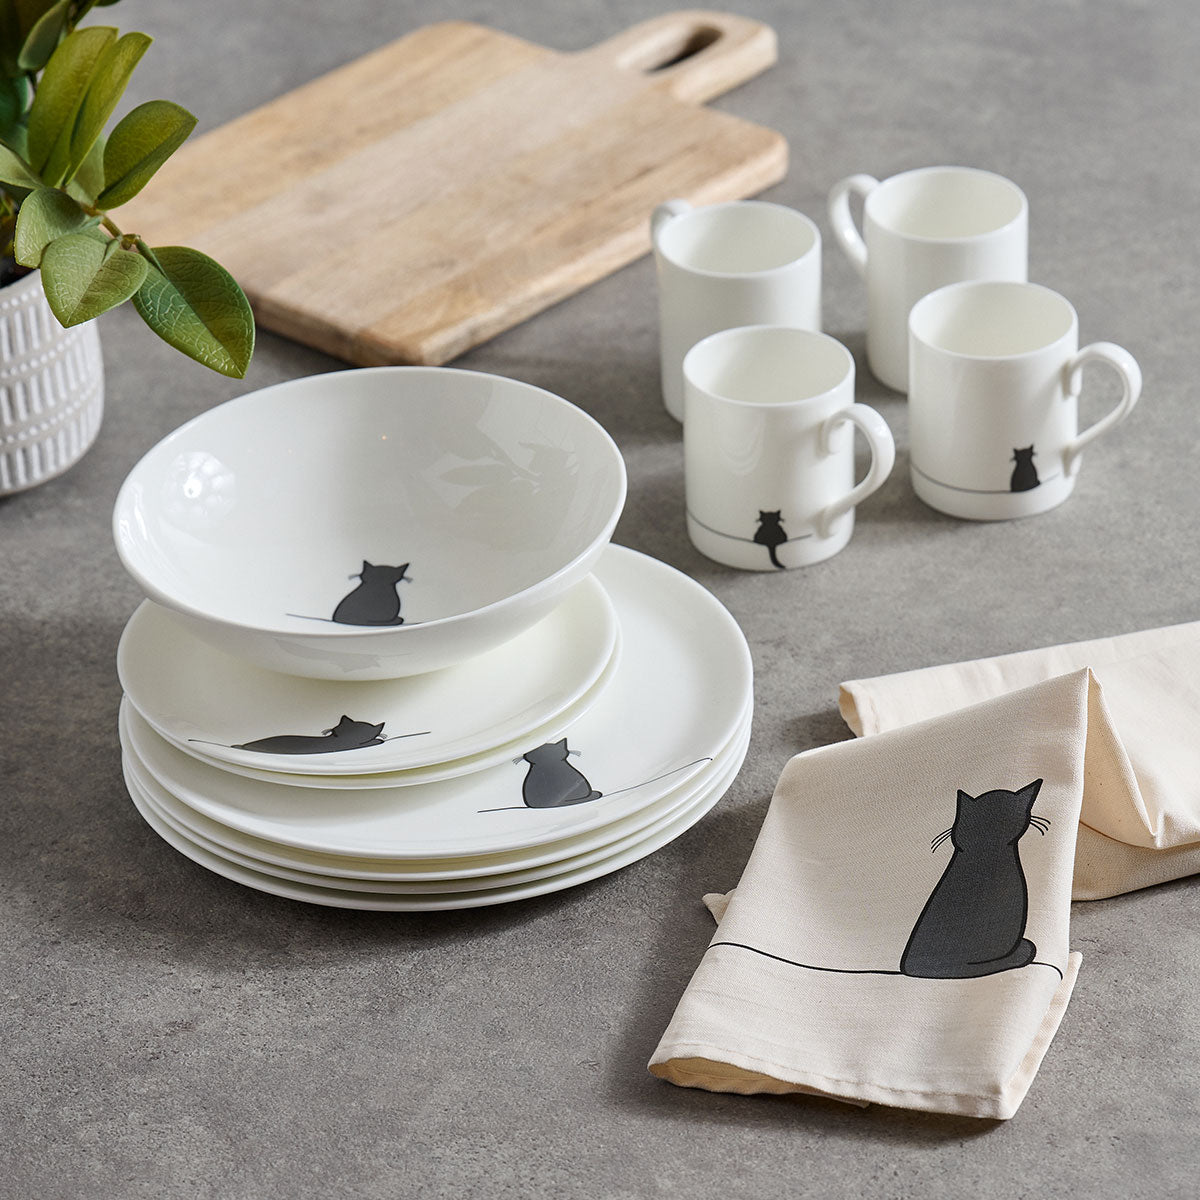 Cat Collection Tableware with Pasta Bowl